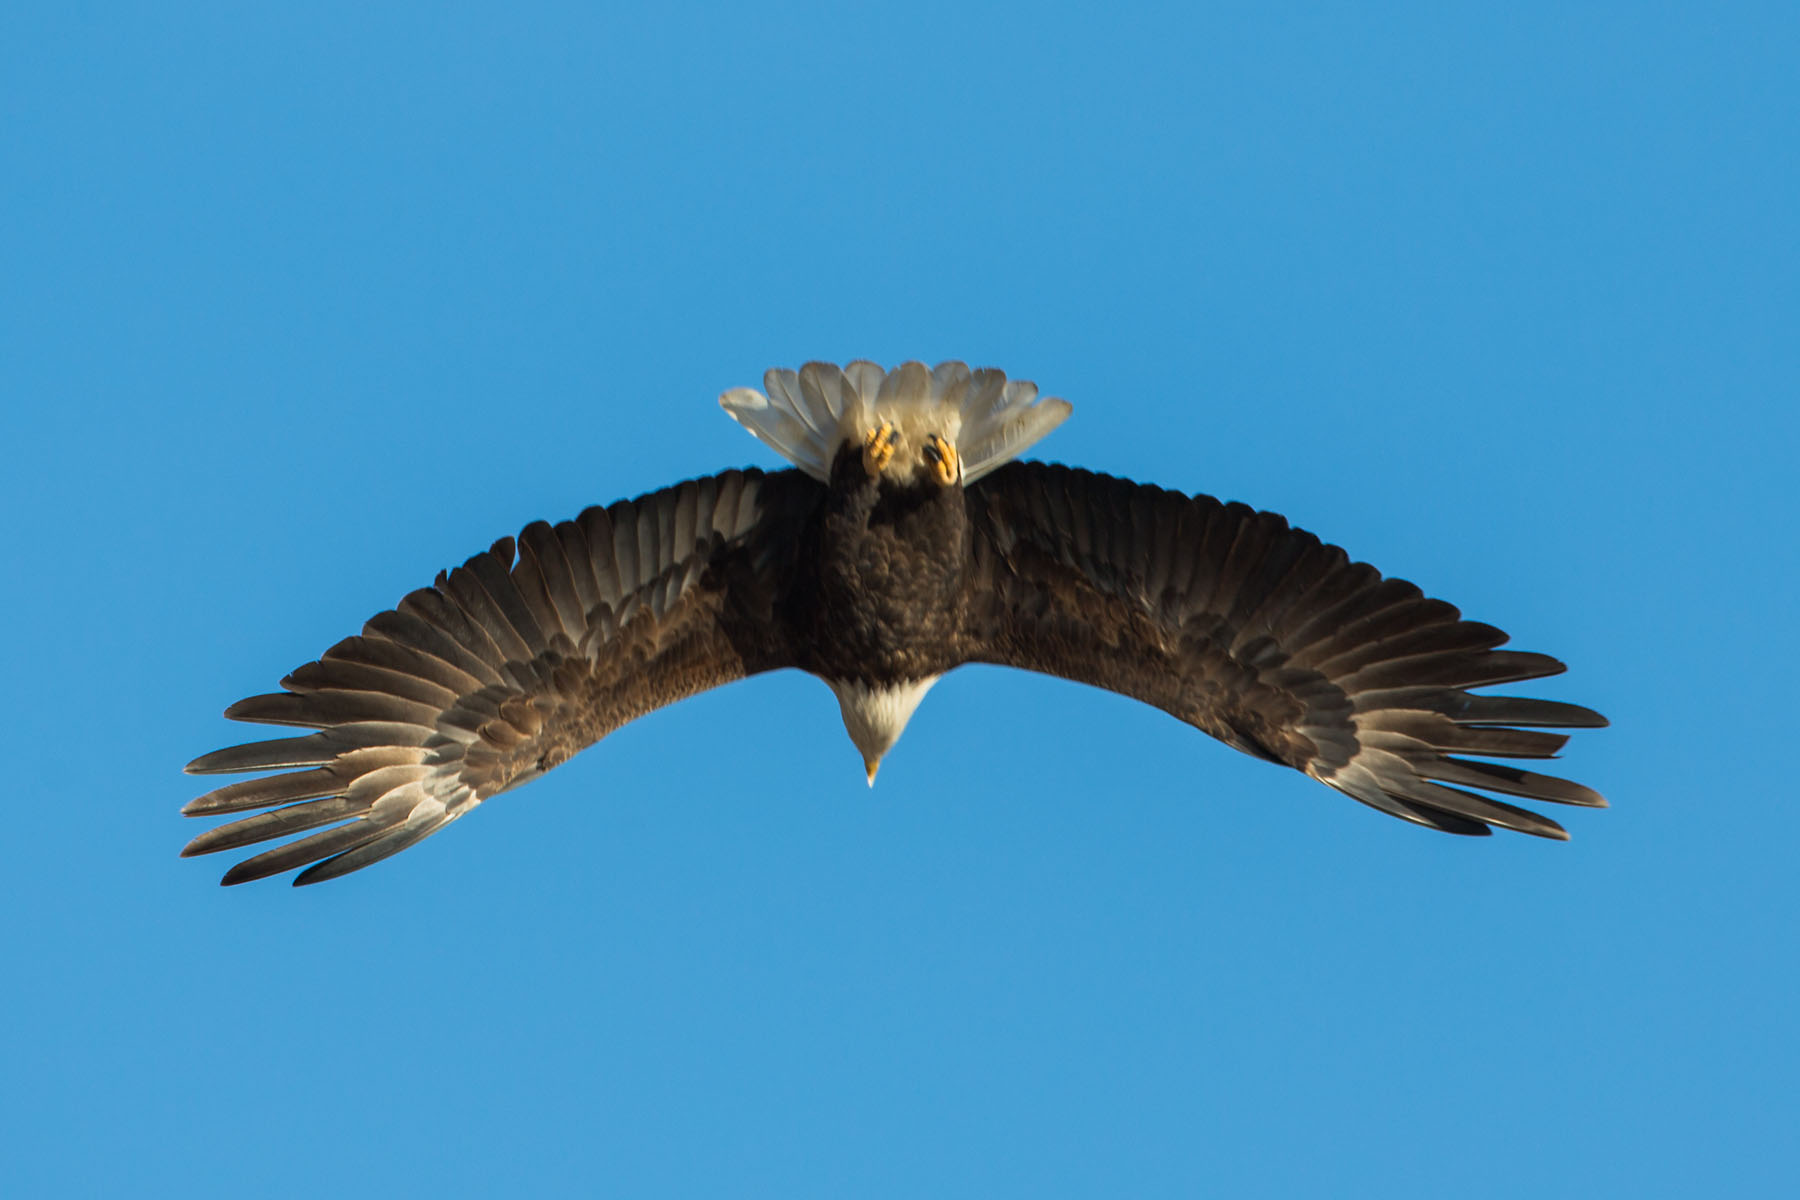 Bald Eagle from a different angle, showing wing detail, Loess Bluffs NWR, December 2019.  Click for next photo.